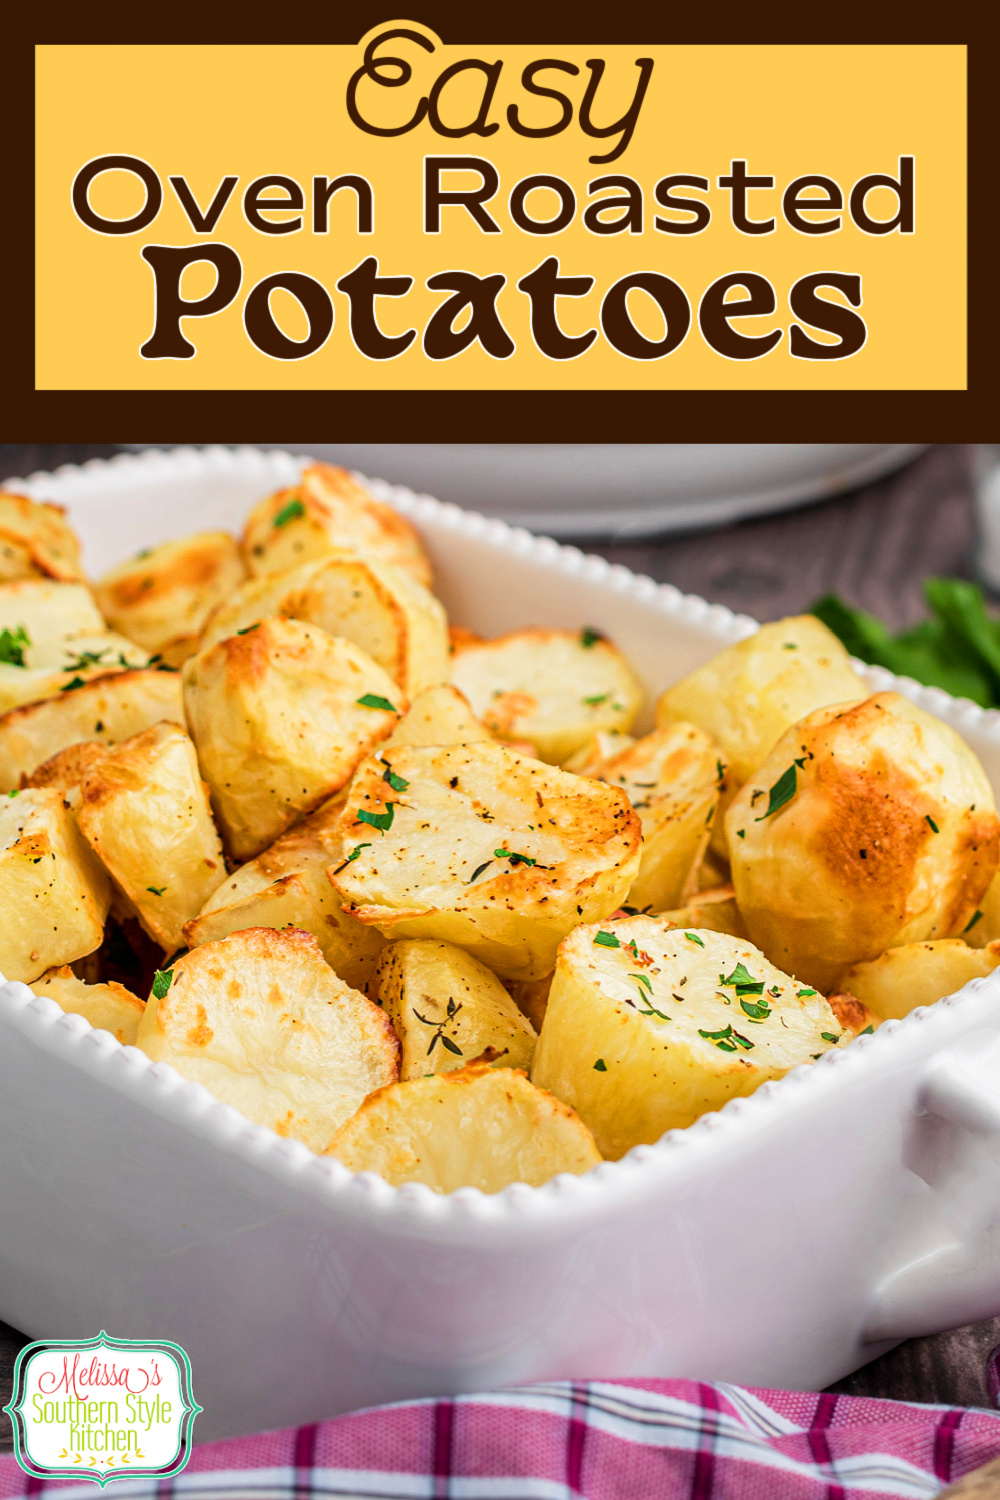 This recipe for Easy Oven Roasted Potatoes is one you'll return to over and over again #roastpotatoes #potatorecipes #ovenroastedpotatoes #russetpotatoes #potatoes #sidedishrecipes #easypotatorecipes via @melissasssk